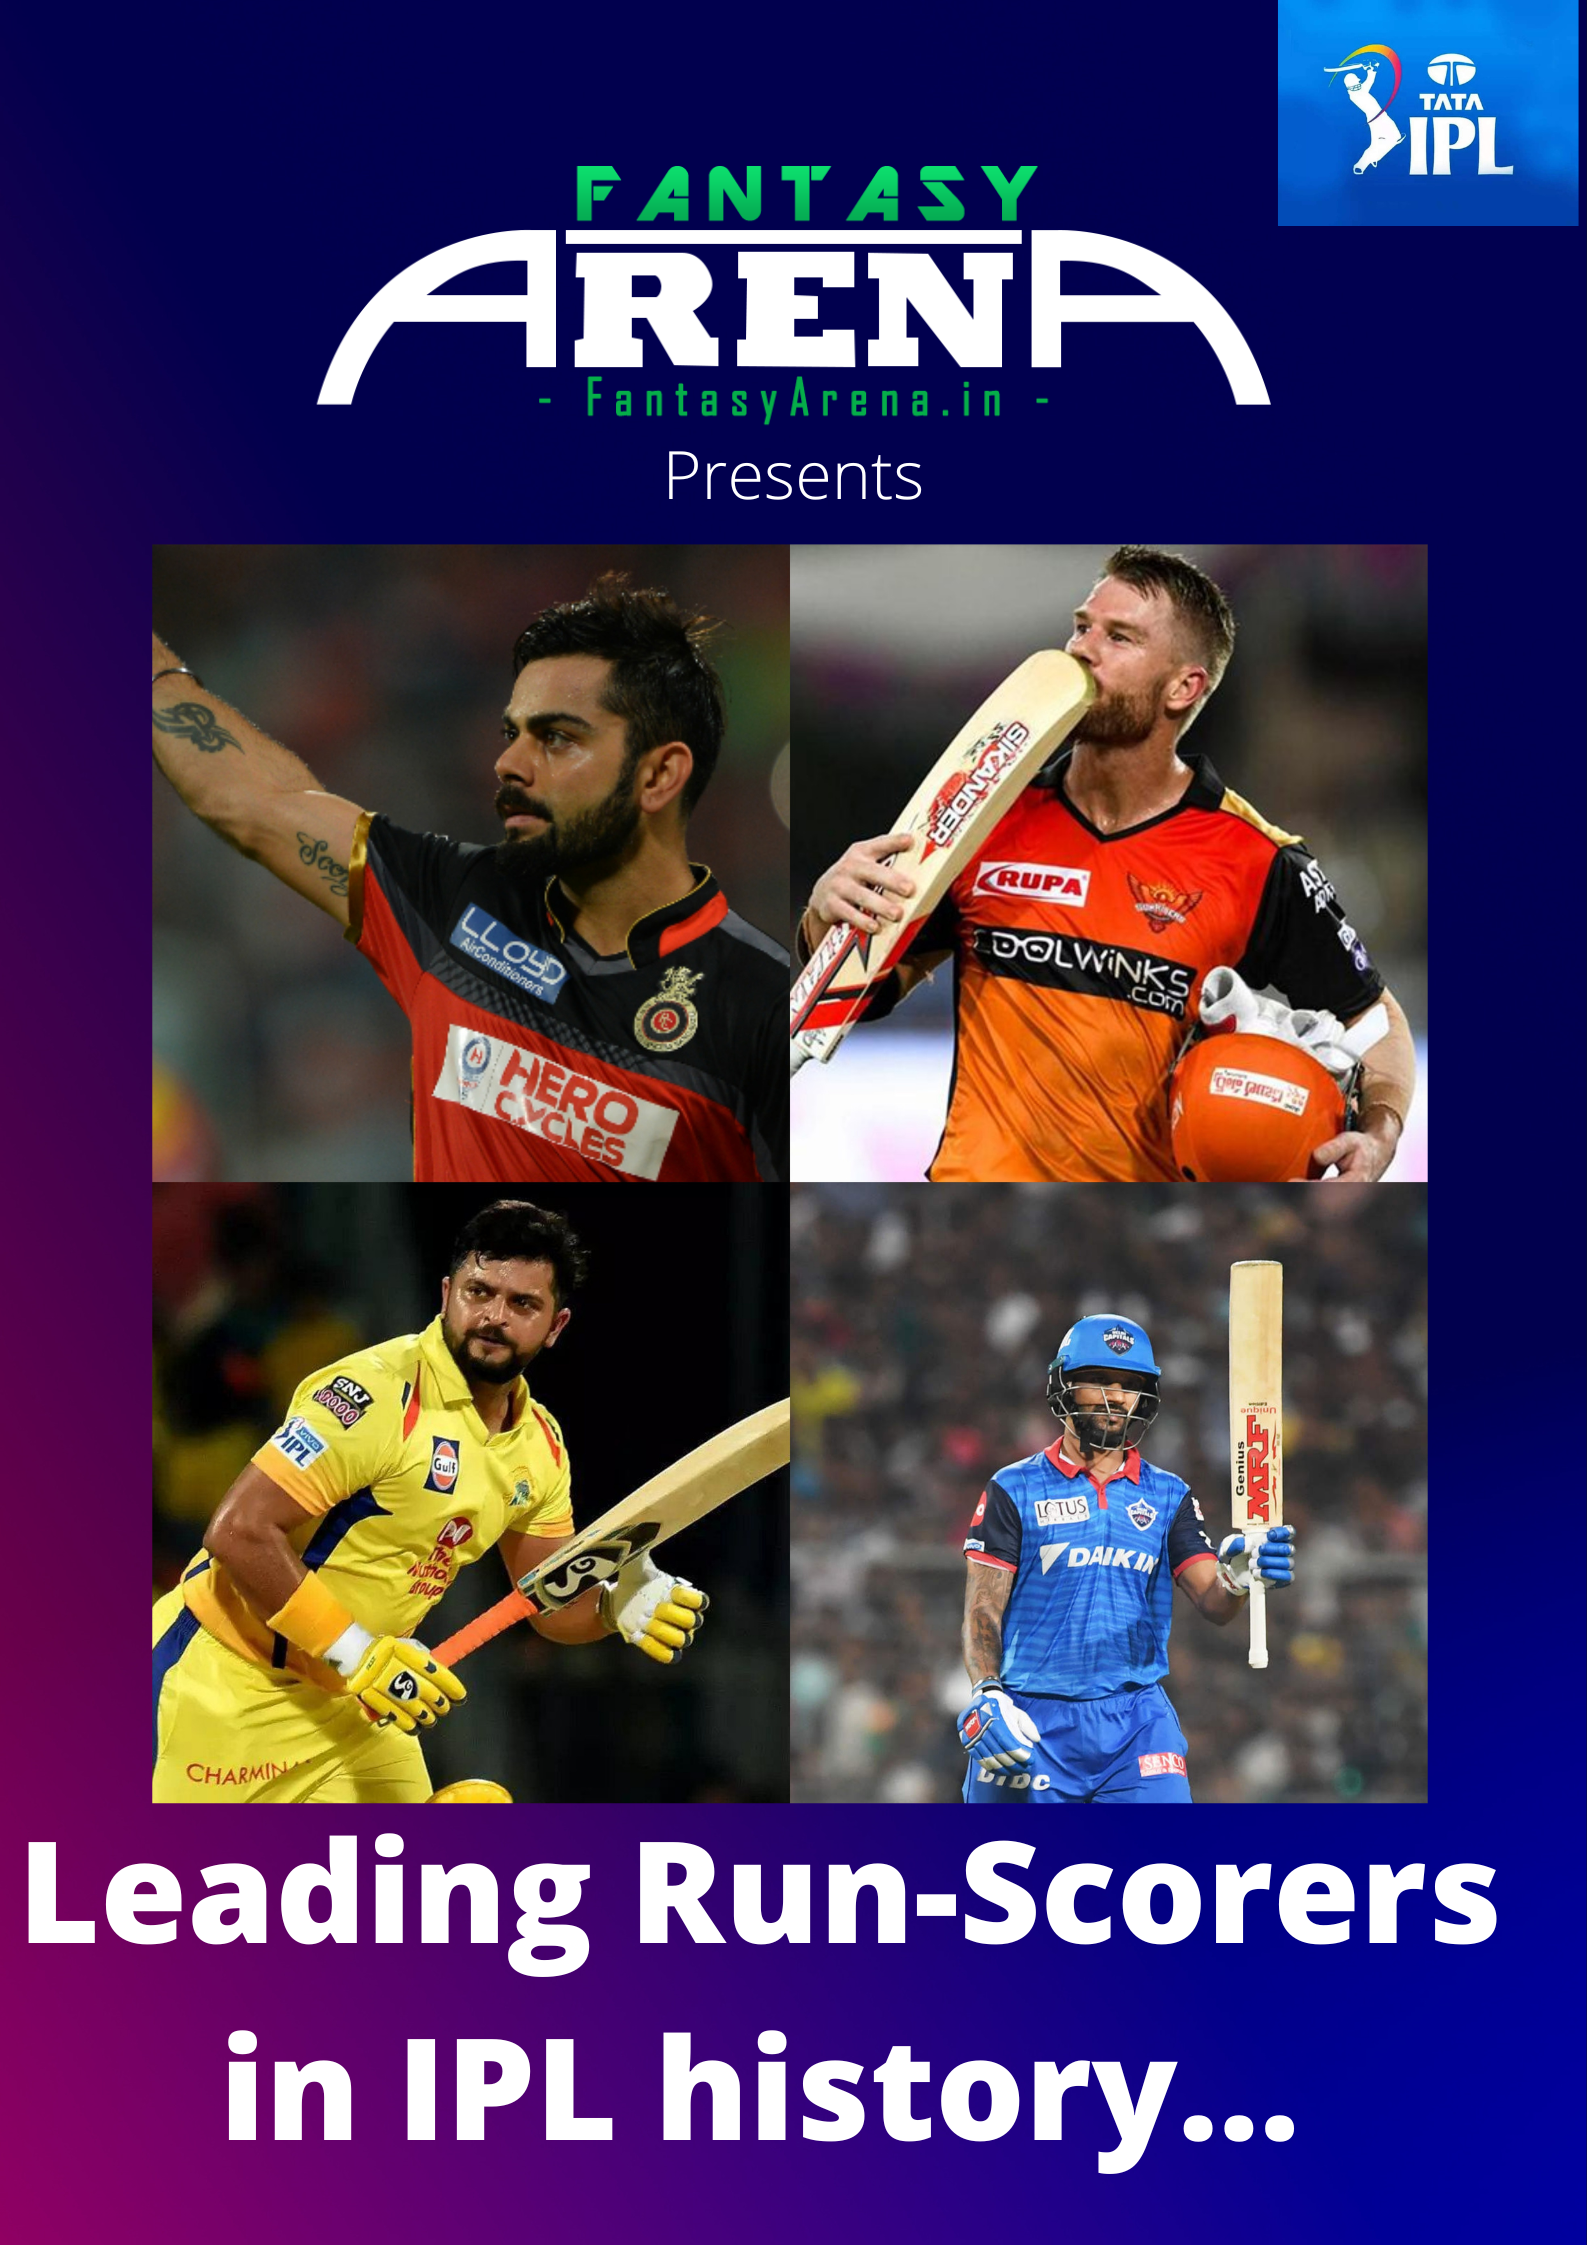 Who has scored the most runs in IPL?